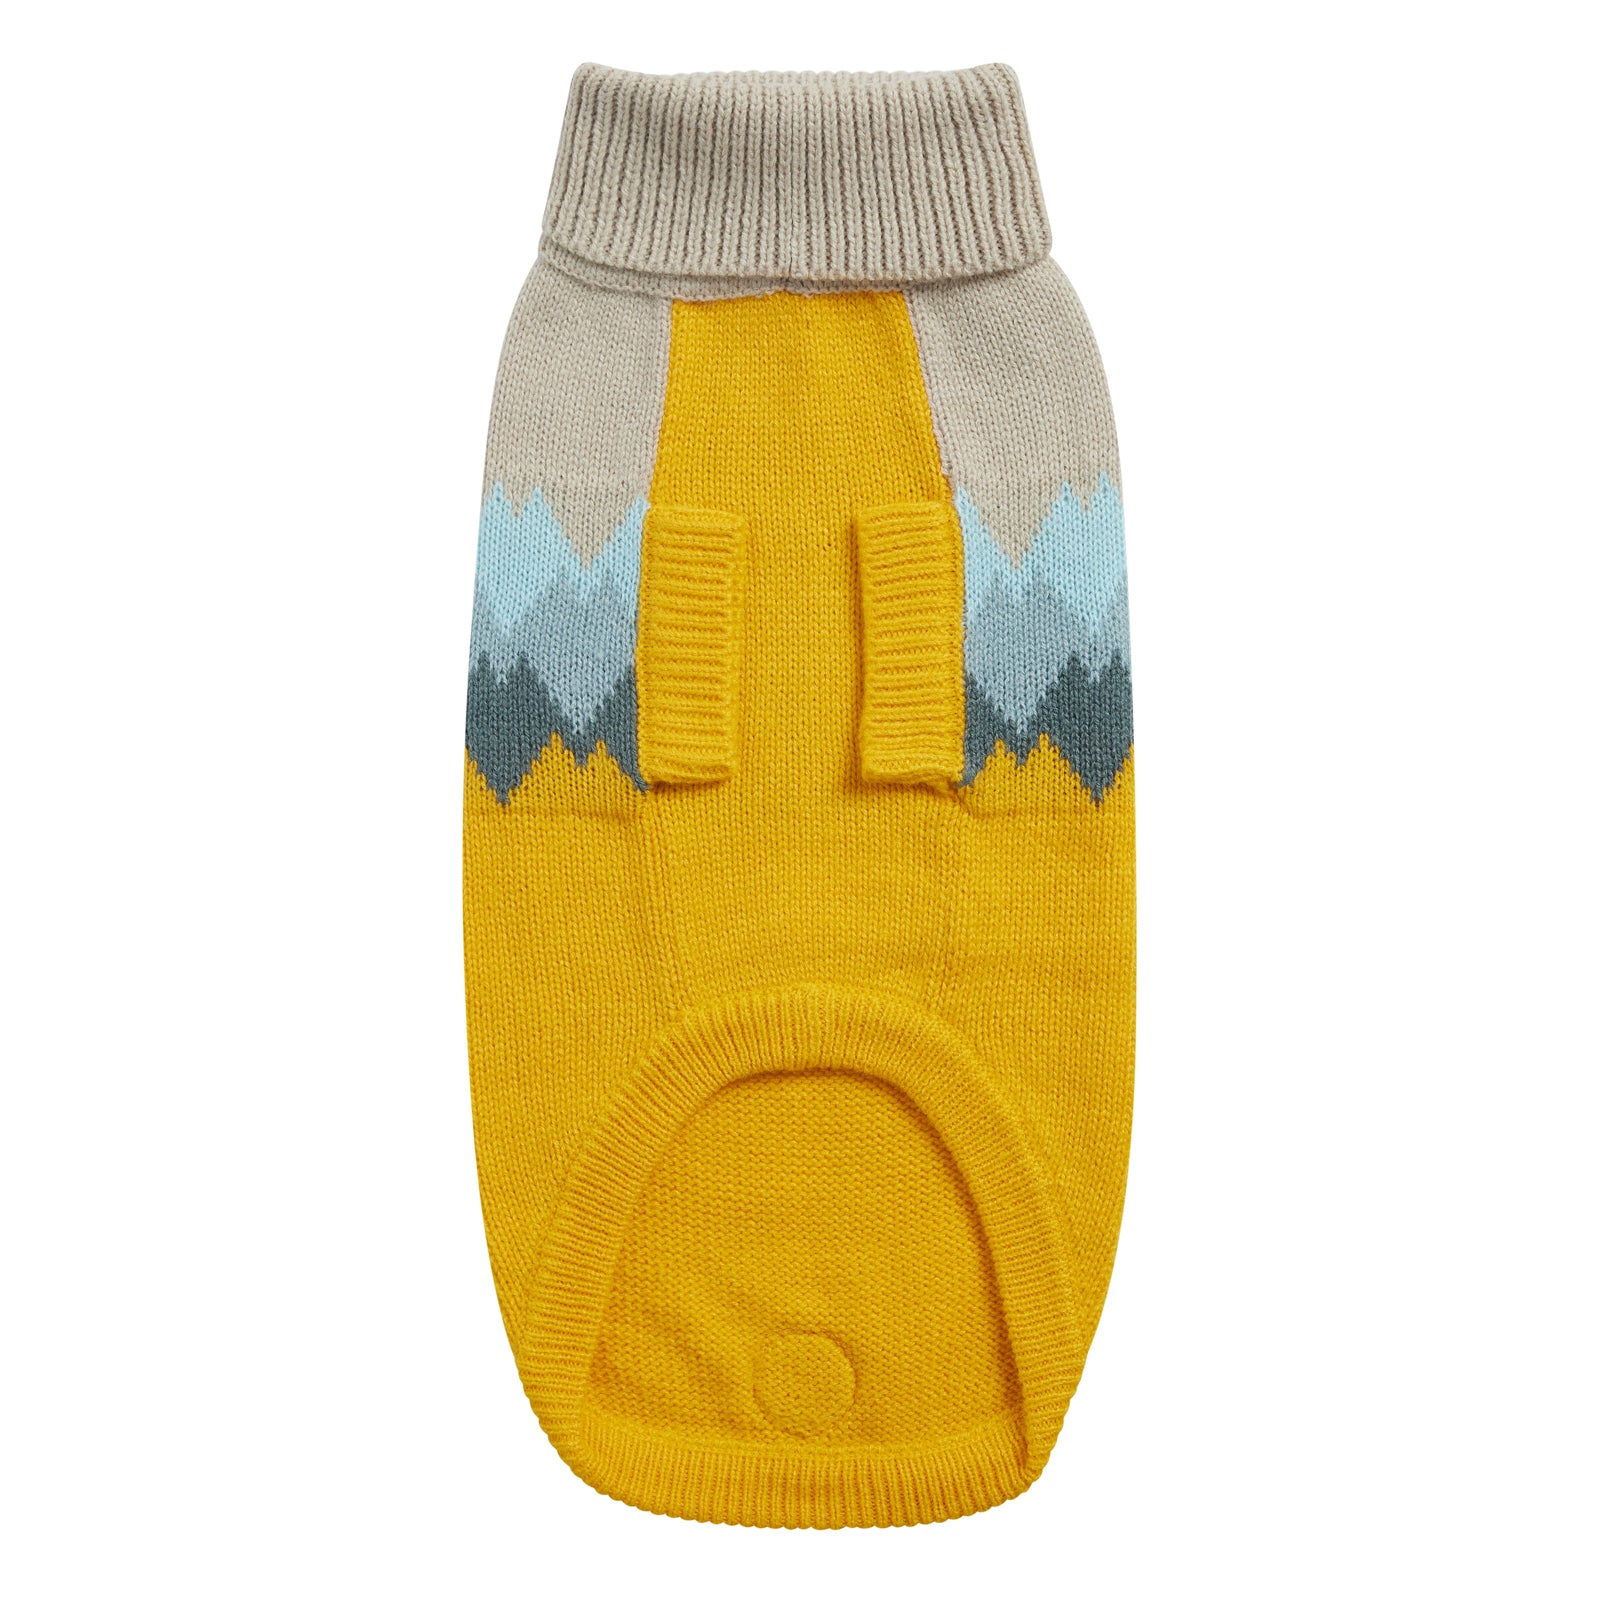 the underside of a beige and yellow dog sweater with colorful mountain peaks graphic